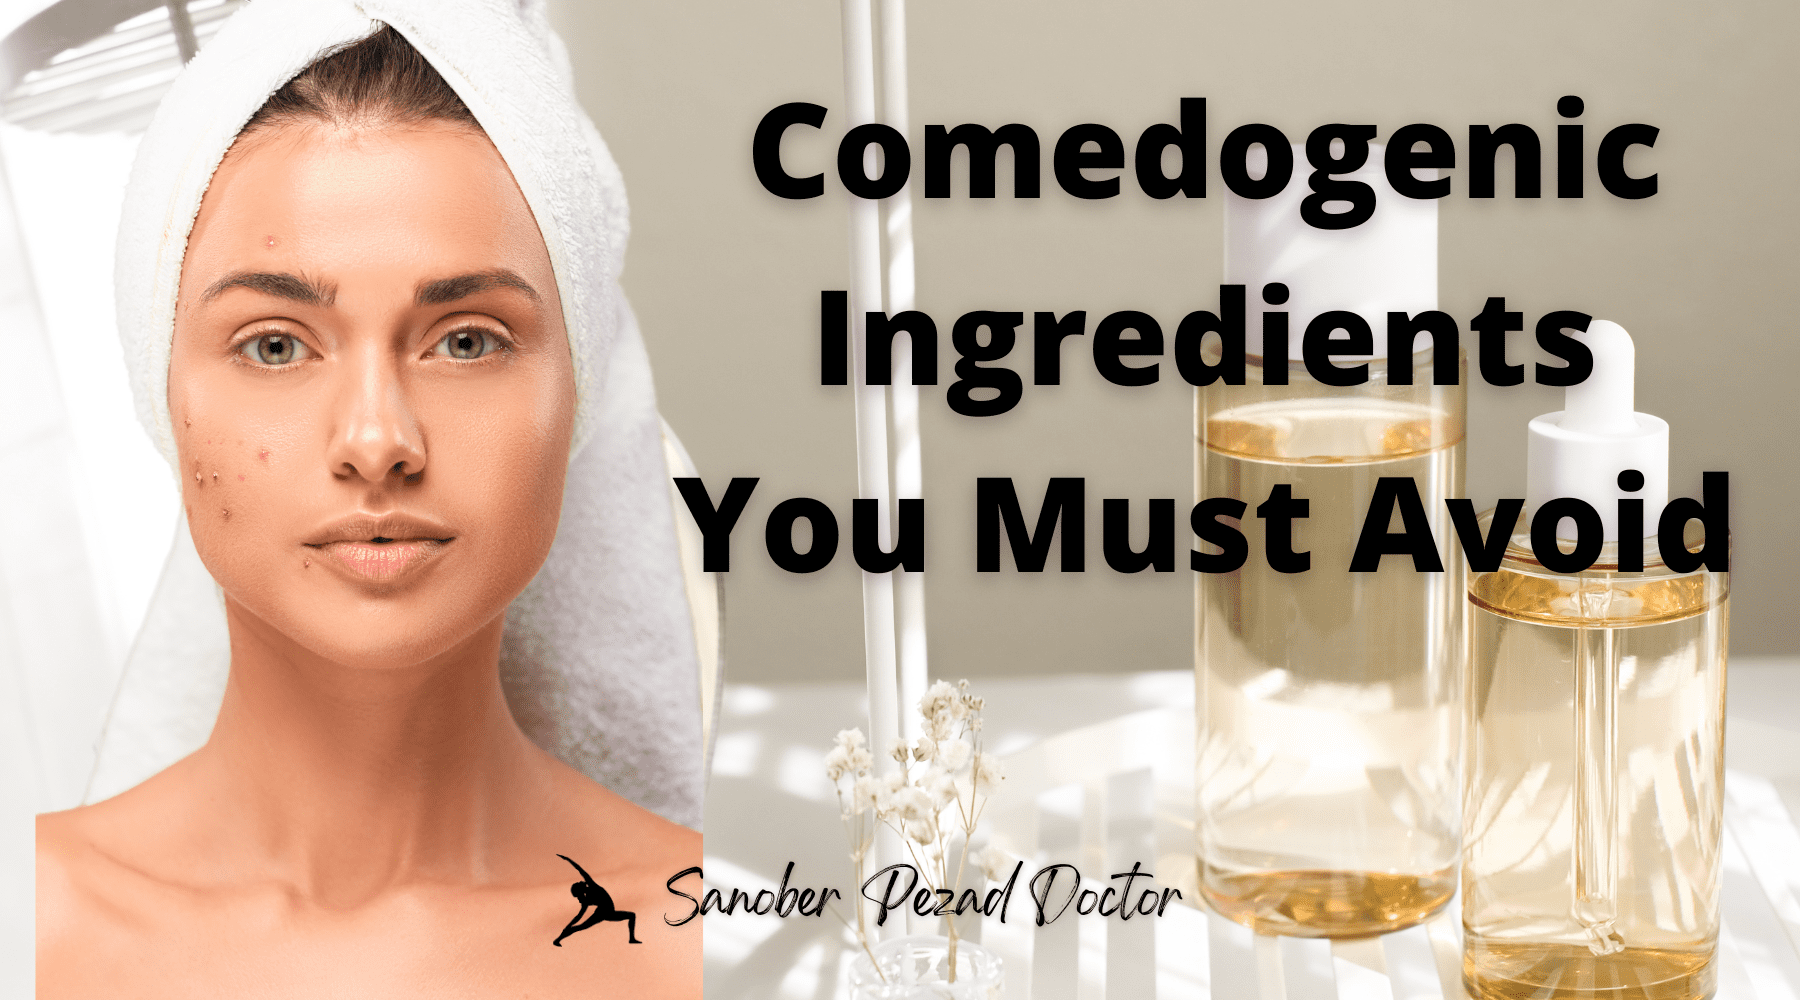 What Comedogenic Ingredients should you Avoid if you have Acne Prone skin?